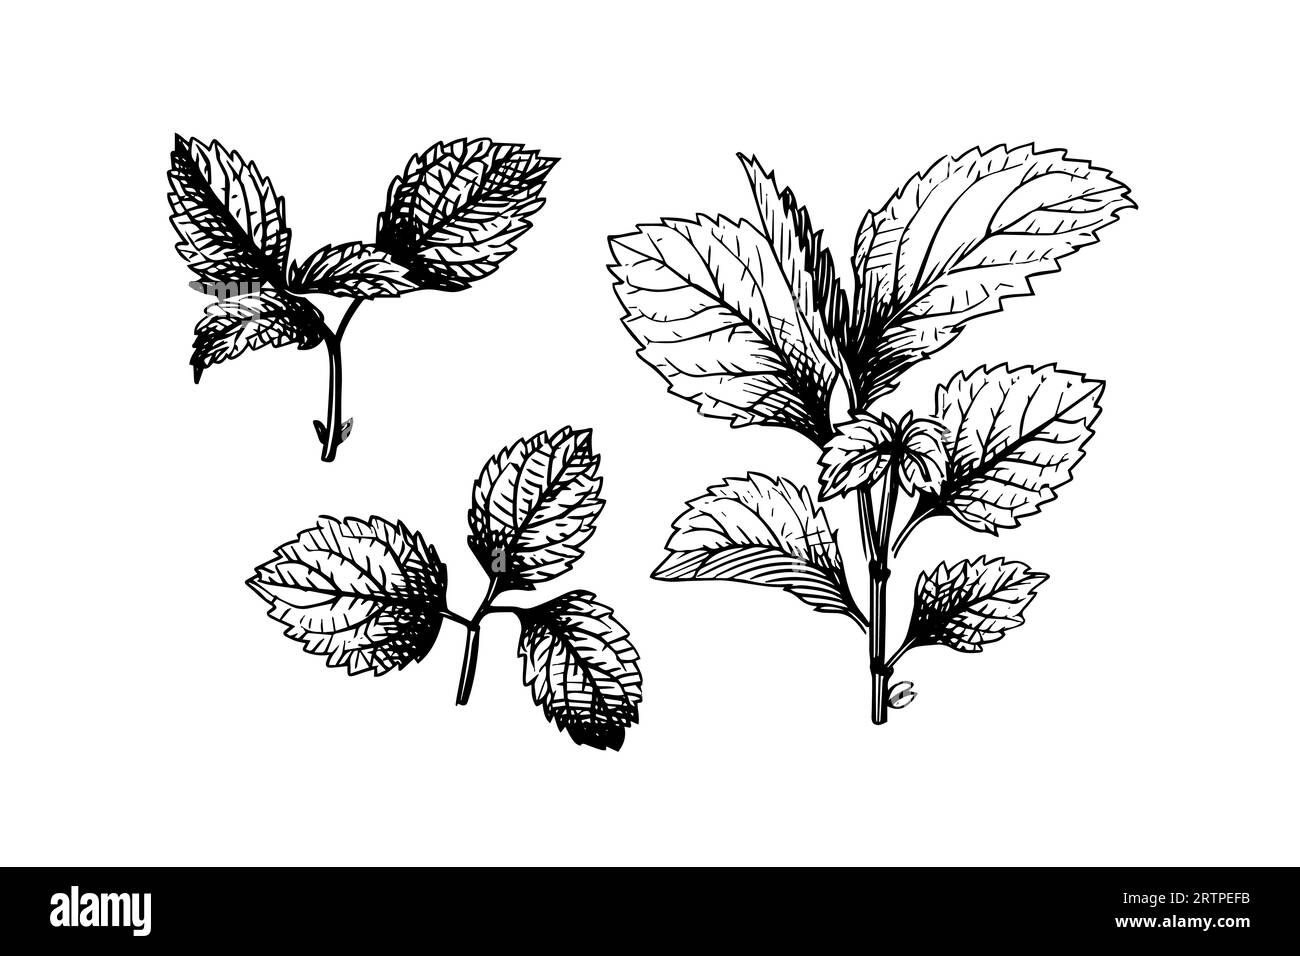 Peppermint sketch. Mint leaves branches and flowers engraving style vector illustration. Stock Vector